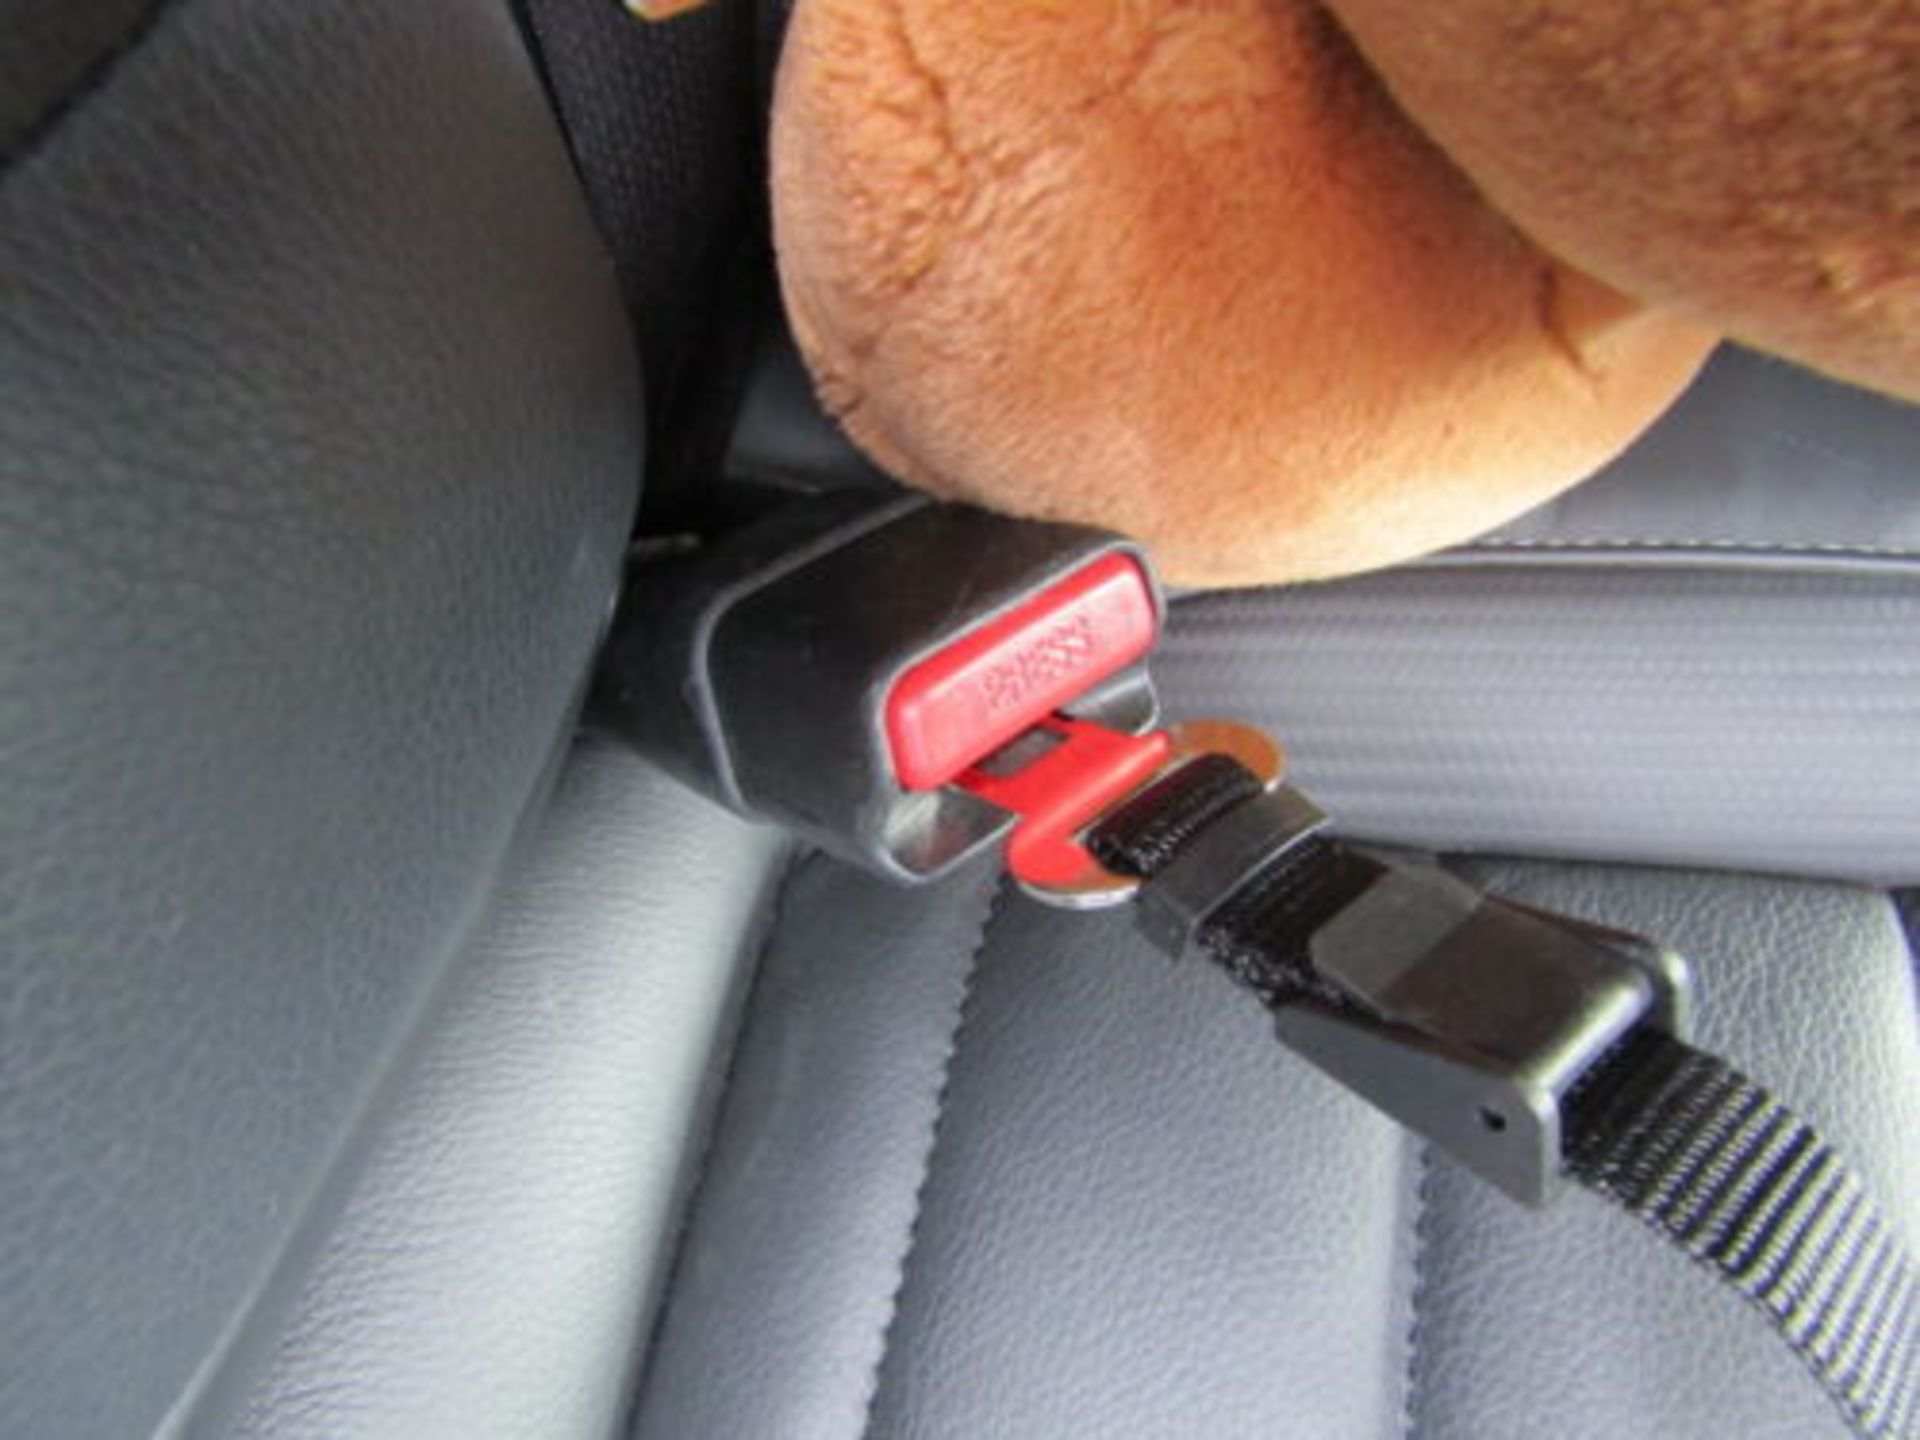 20 x Seat Belt Adaptor For Pets - Image 4 of 4